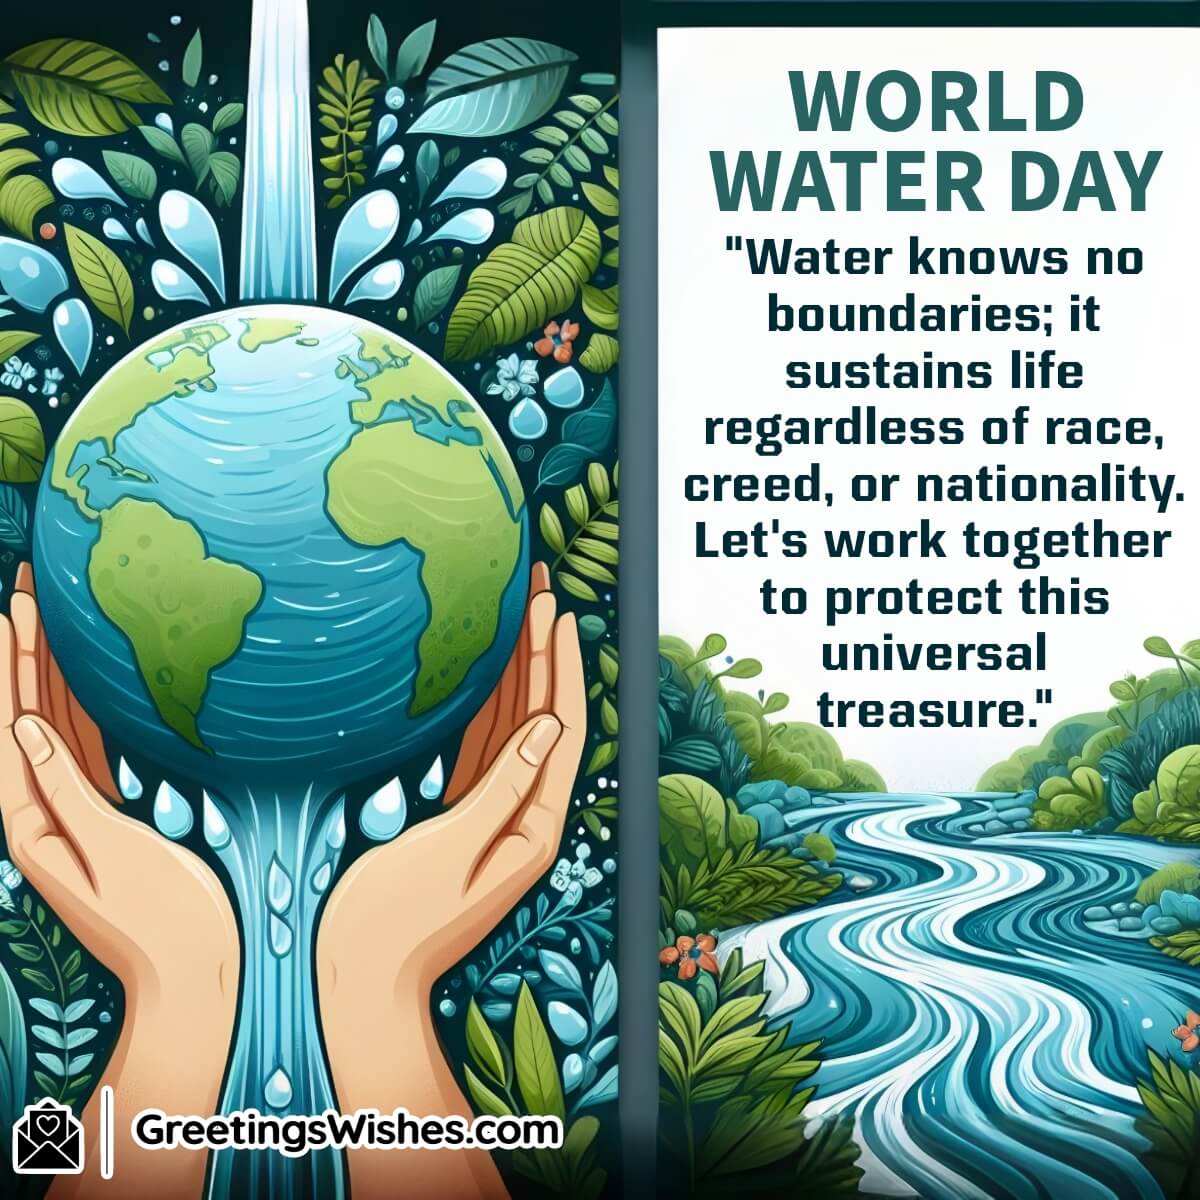 World Water Day Message